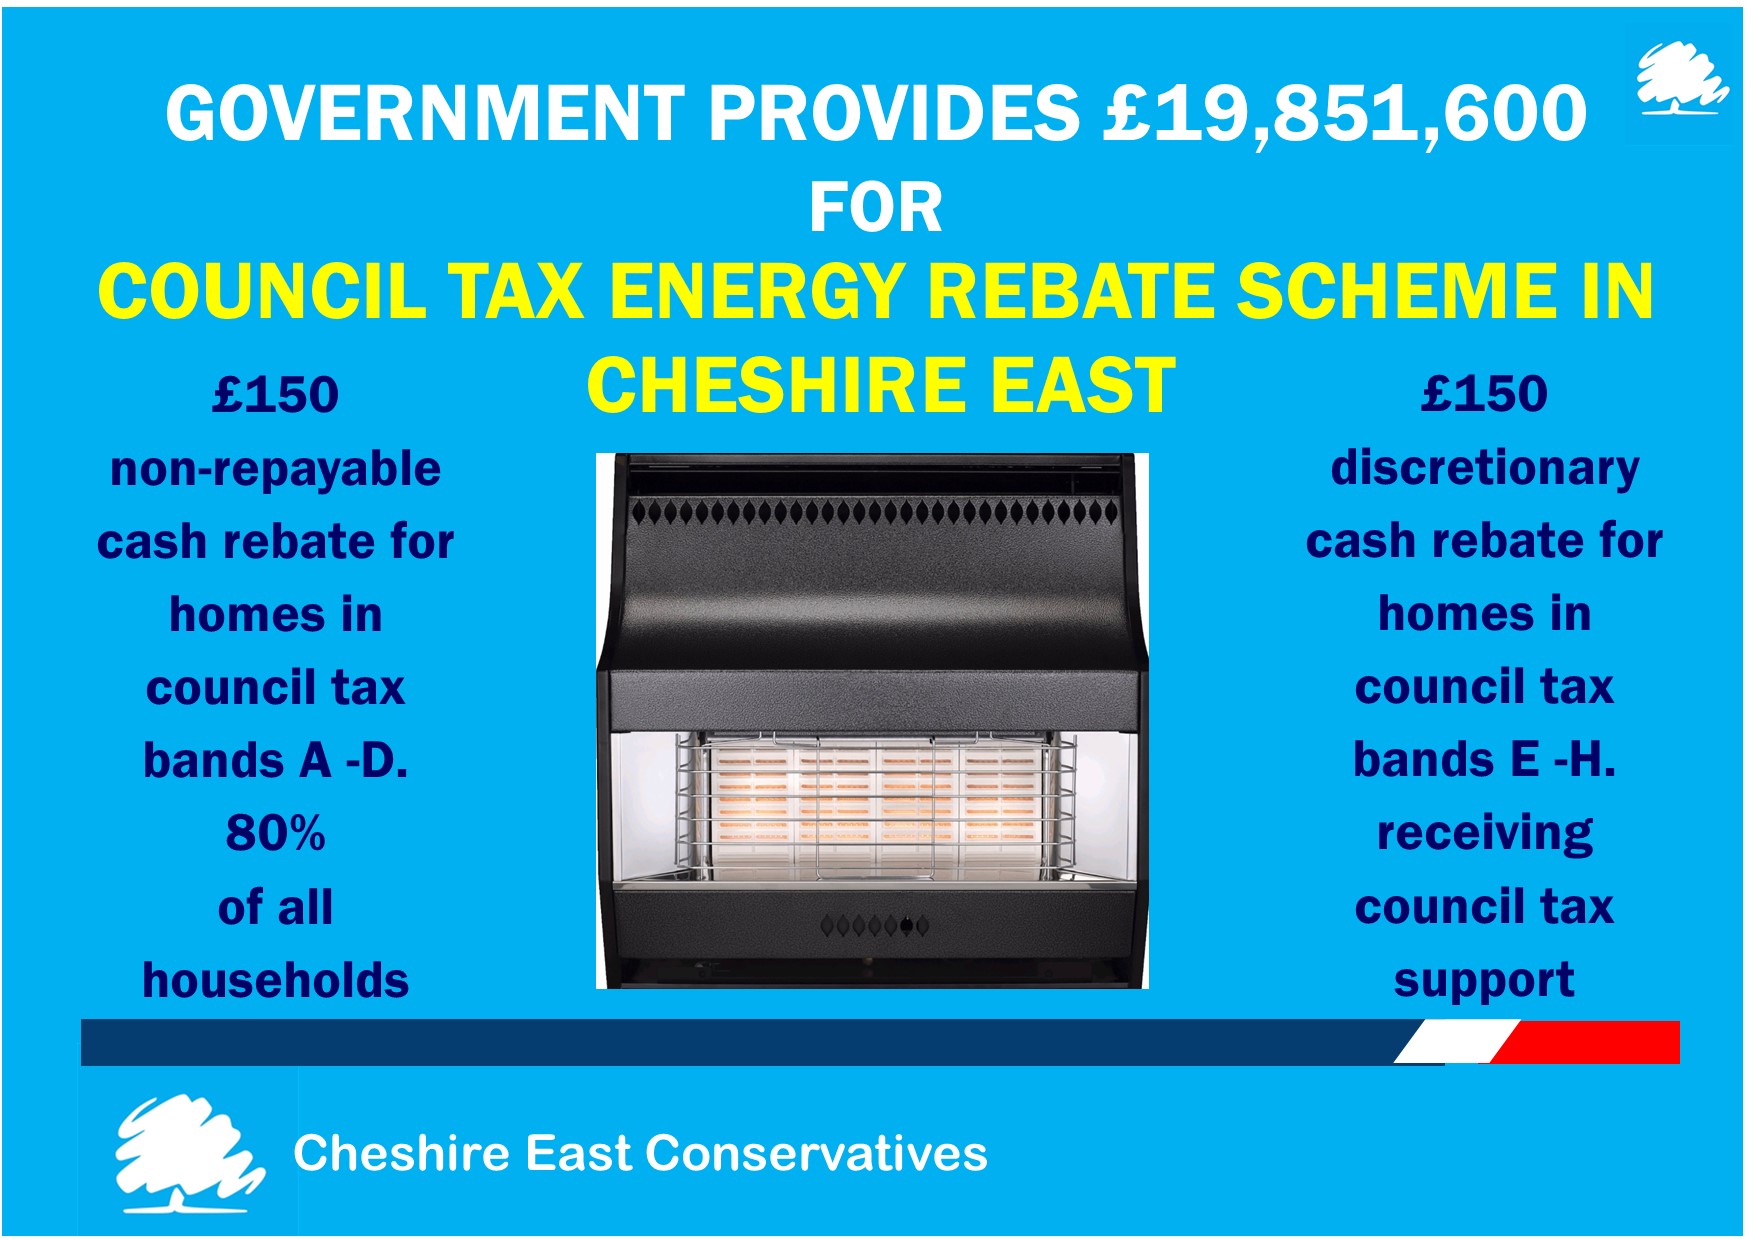 Cheshire East Conservatives Welcome Nearly 20m For Council Tax Rebate 